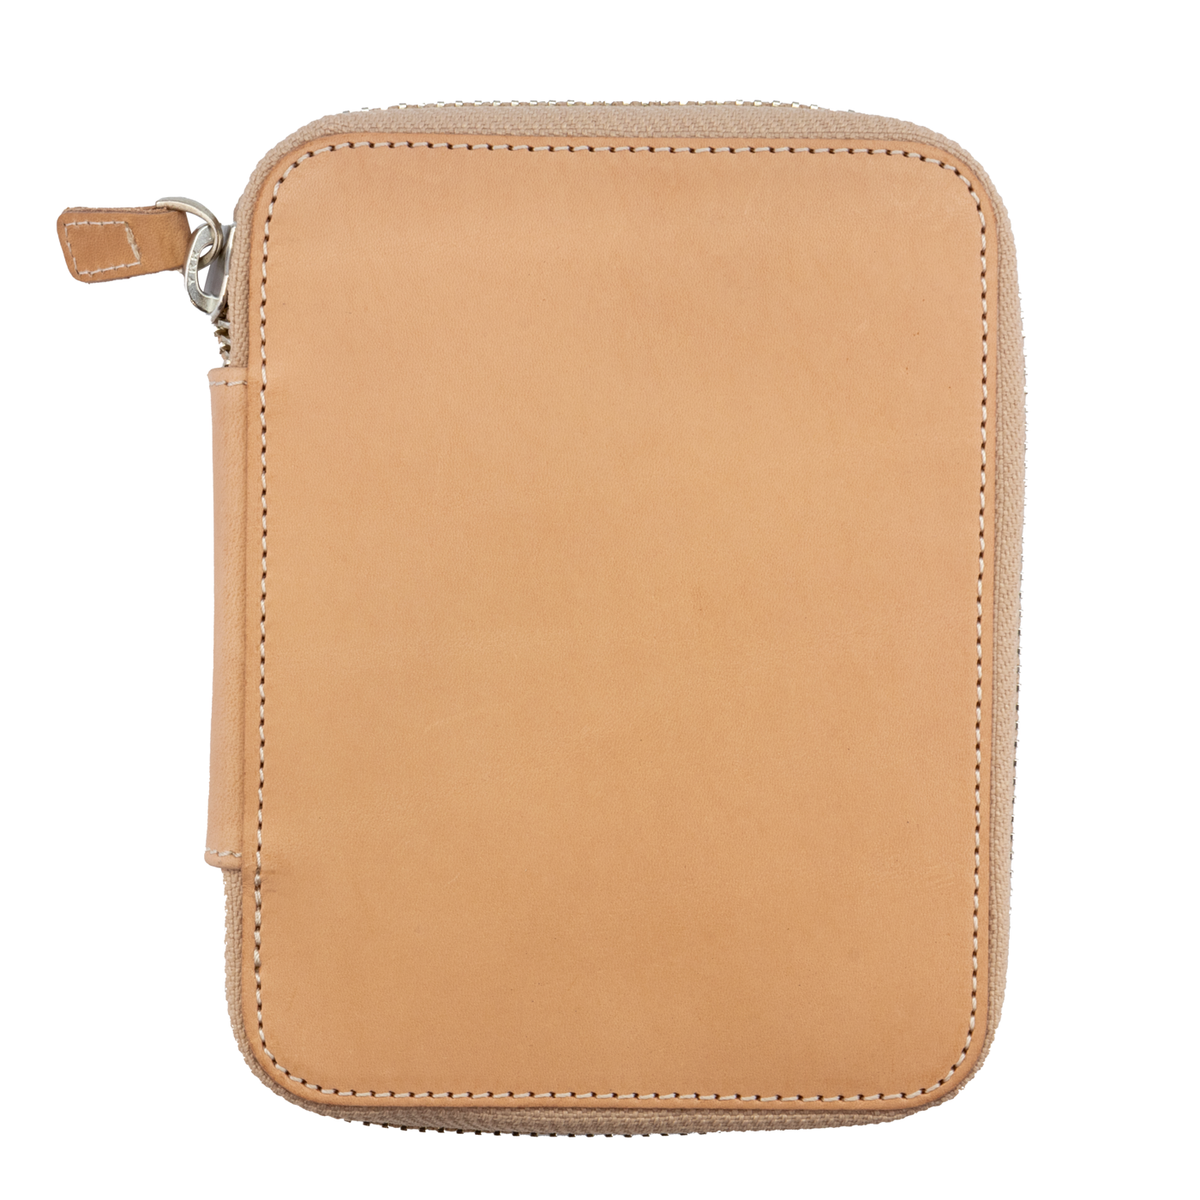 Galen Leather Co. Zippered Duo Slim Pen Case for 2 Pens- Undyed Leathe